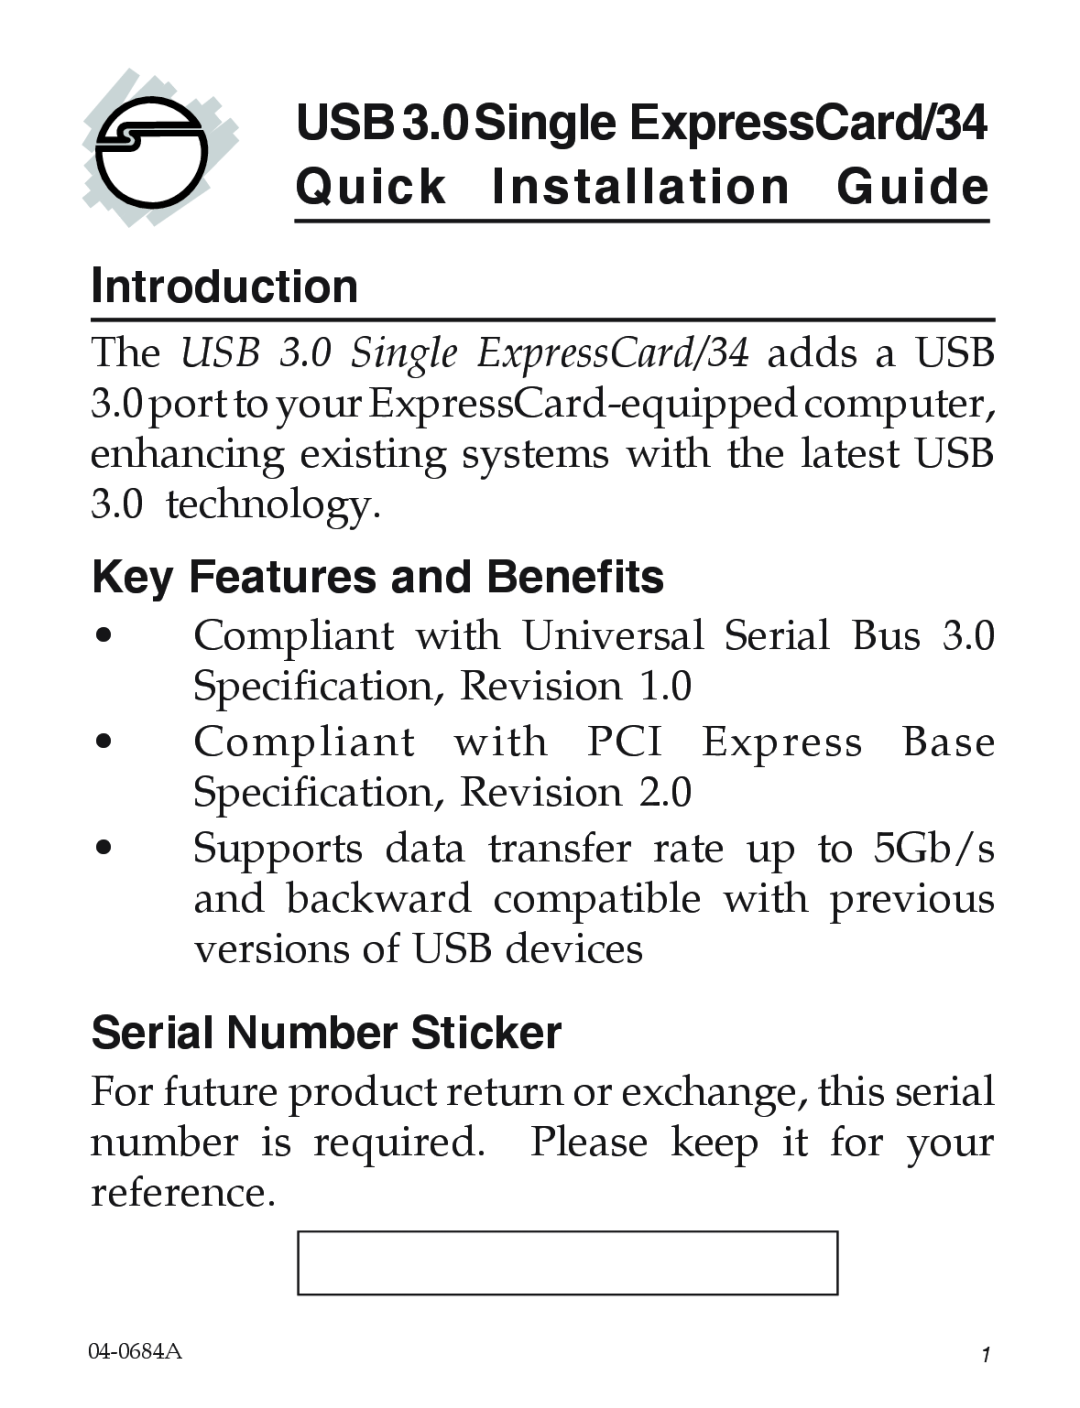 SIIG 5053, 5052 manual USB3.0Single ExpressCard/34 Quick Installation Guide, Introduction, Key Features and Benefits 